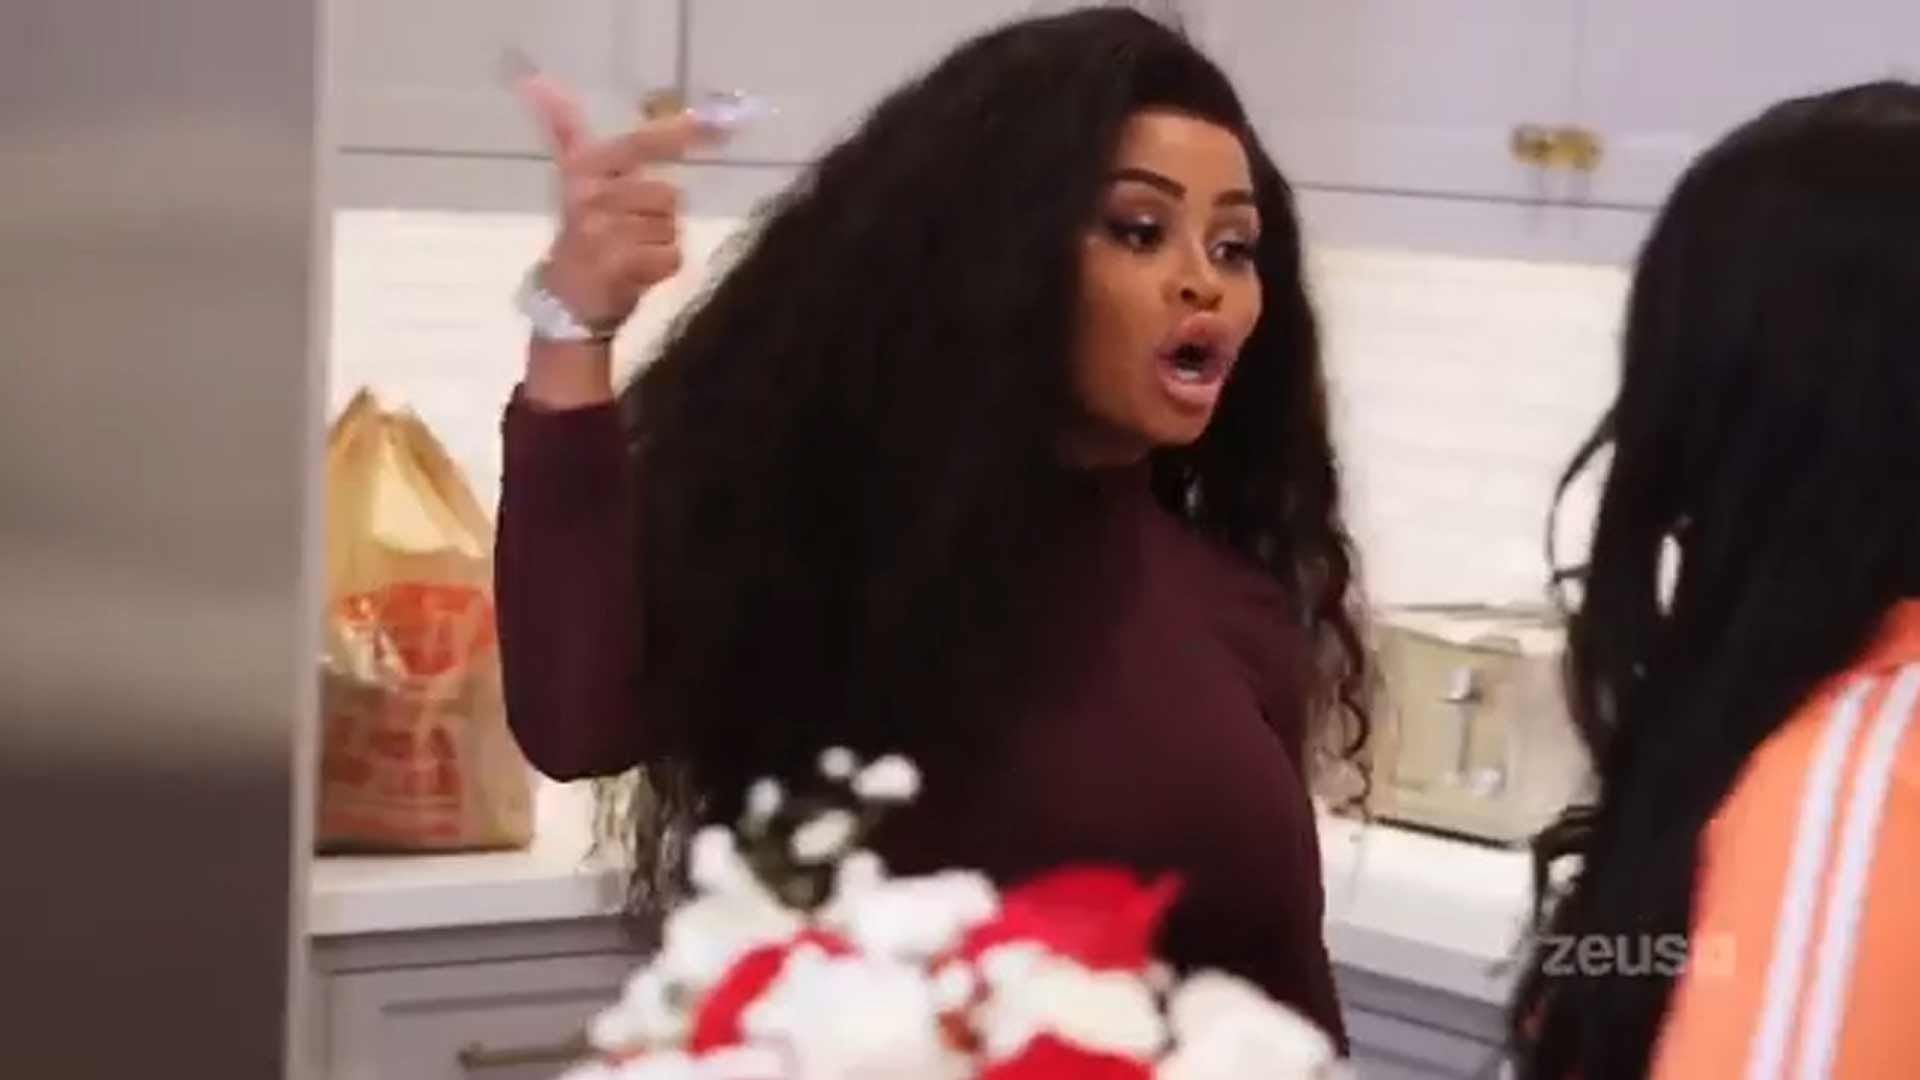 Blac Chyna Gets In A Nasty Fight With Her Mom In Reality Show Teaser